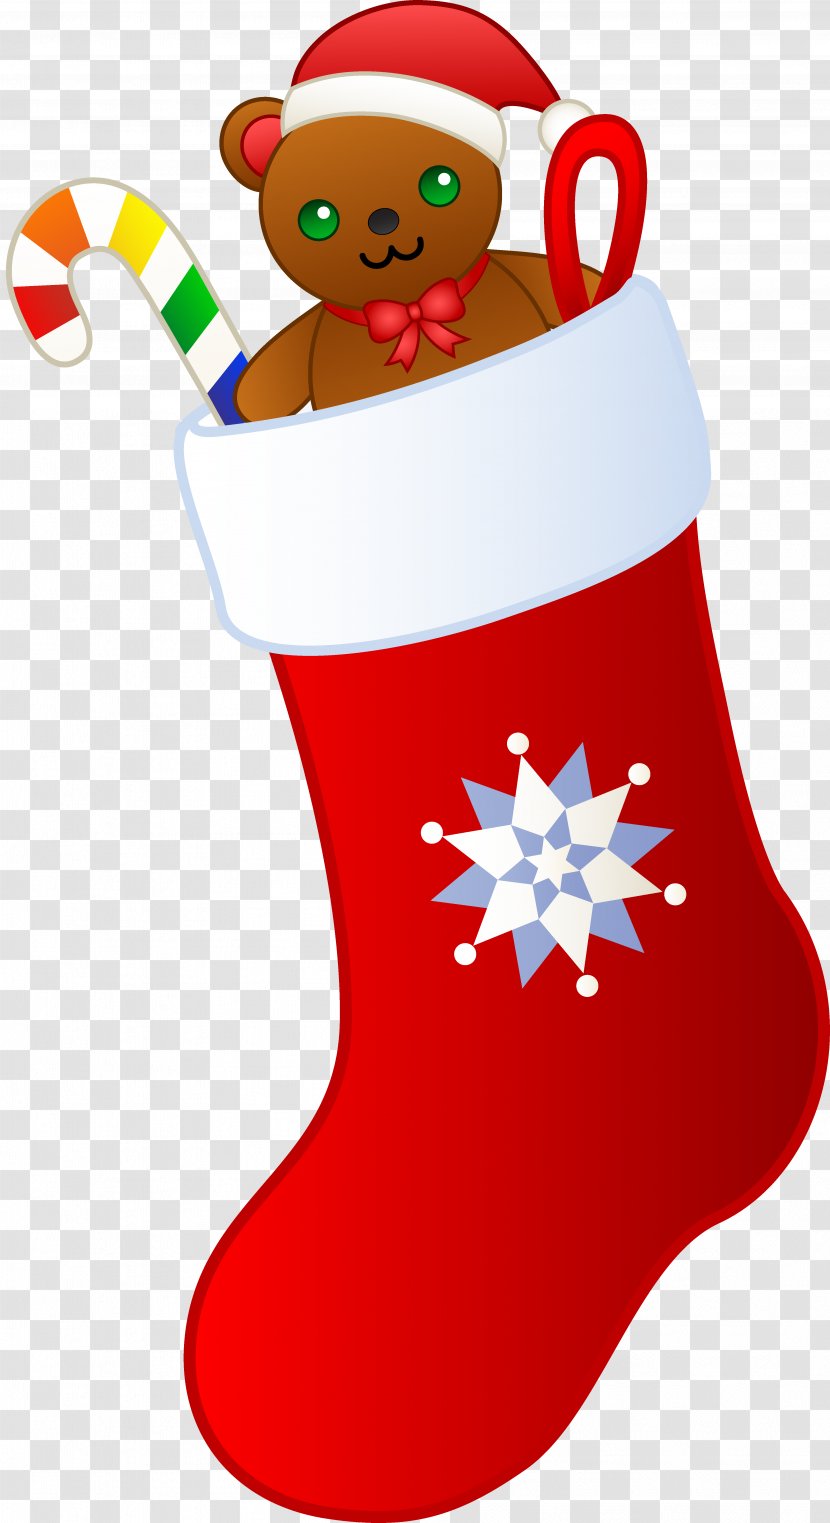 Candy Cane Christmas Stockings Clip Art - Card - Stocking Sock Cliparts Transparent PNG